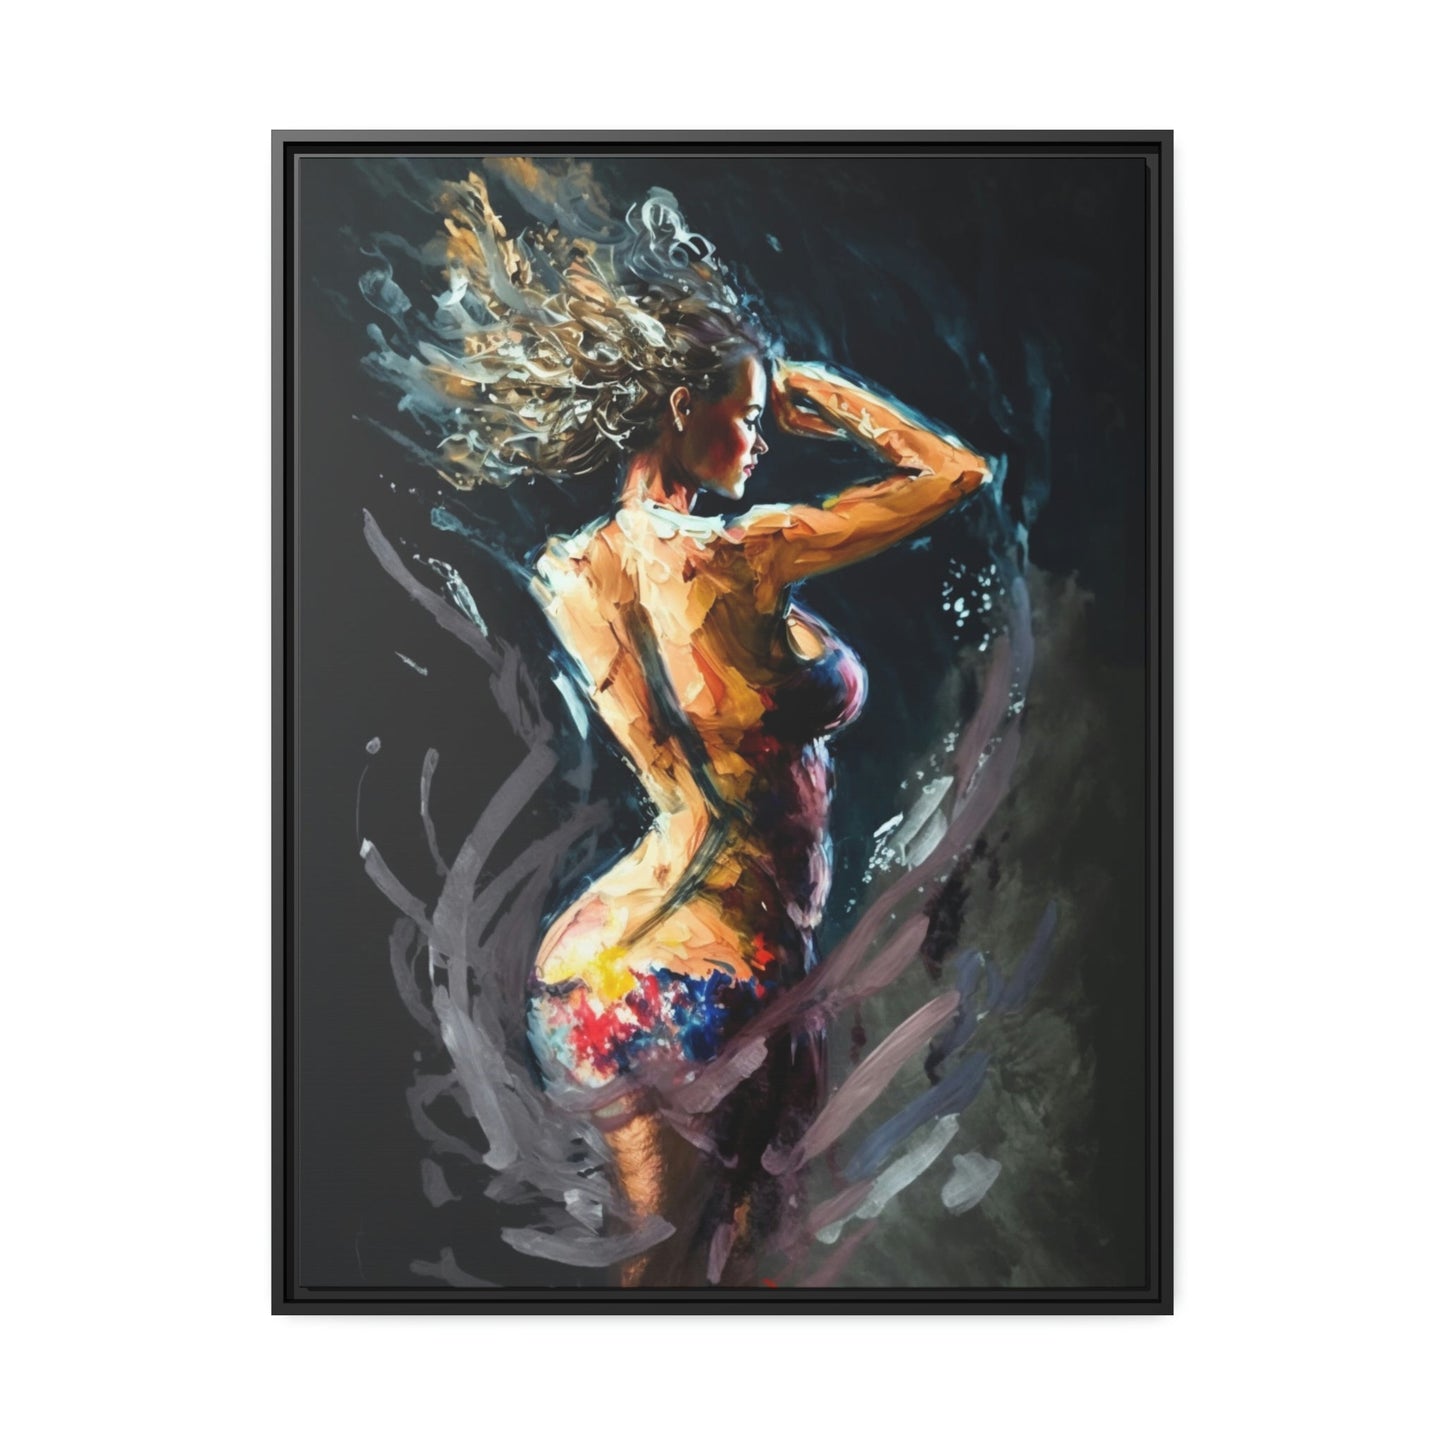 The Art of Movement: Canvas & Poster Print of Abstract Dance Figures